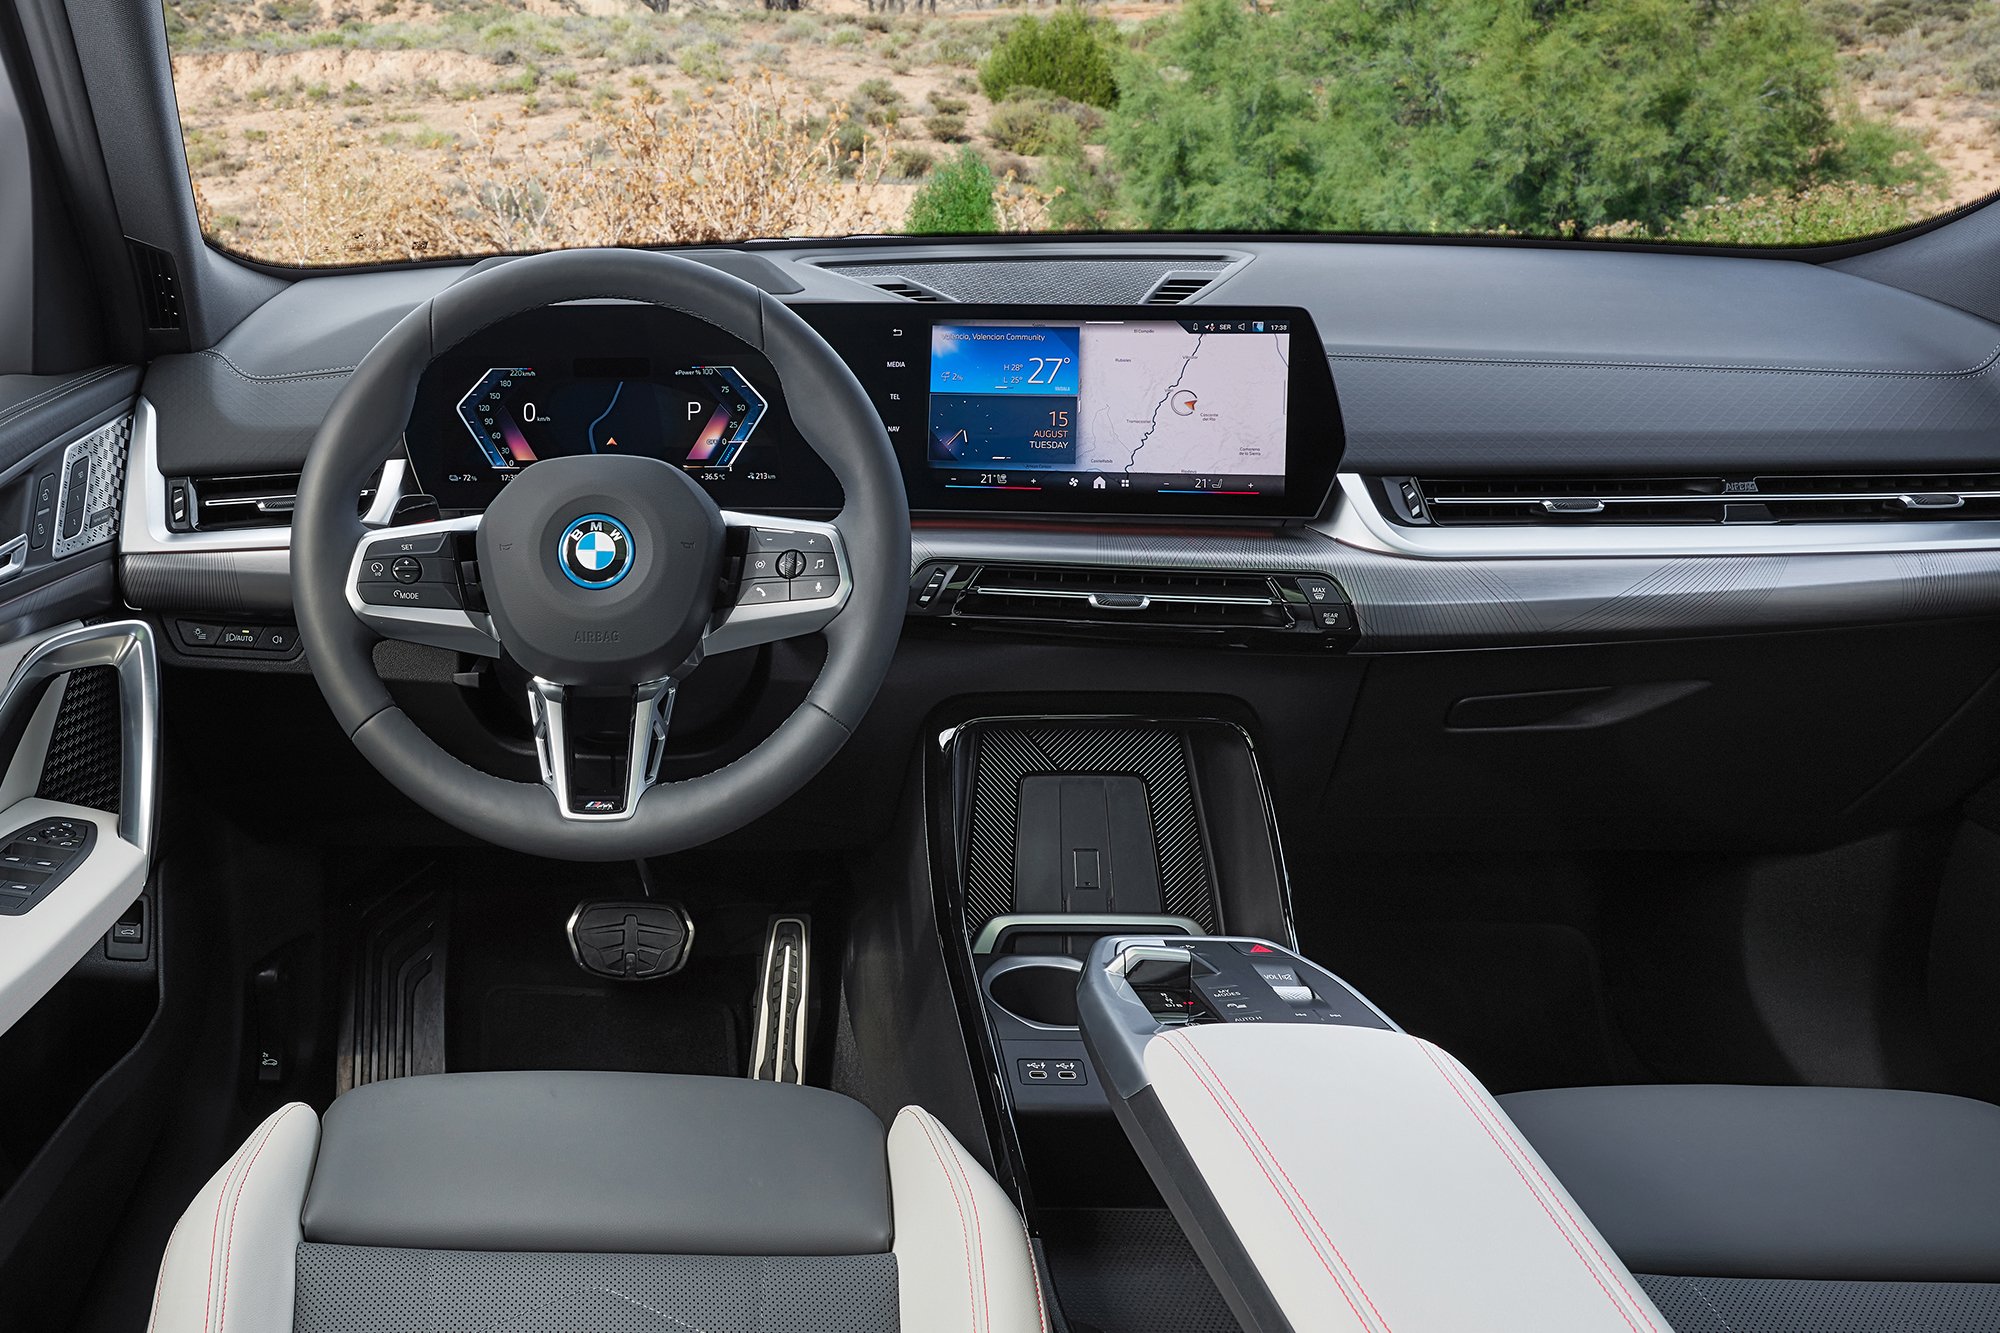 The interior design and BMW Curved Display in the new BMW iX2